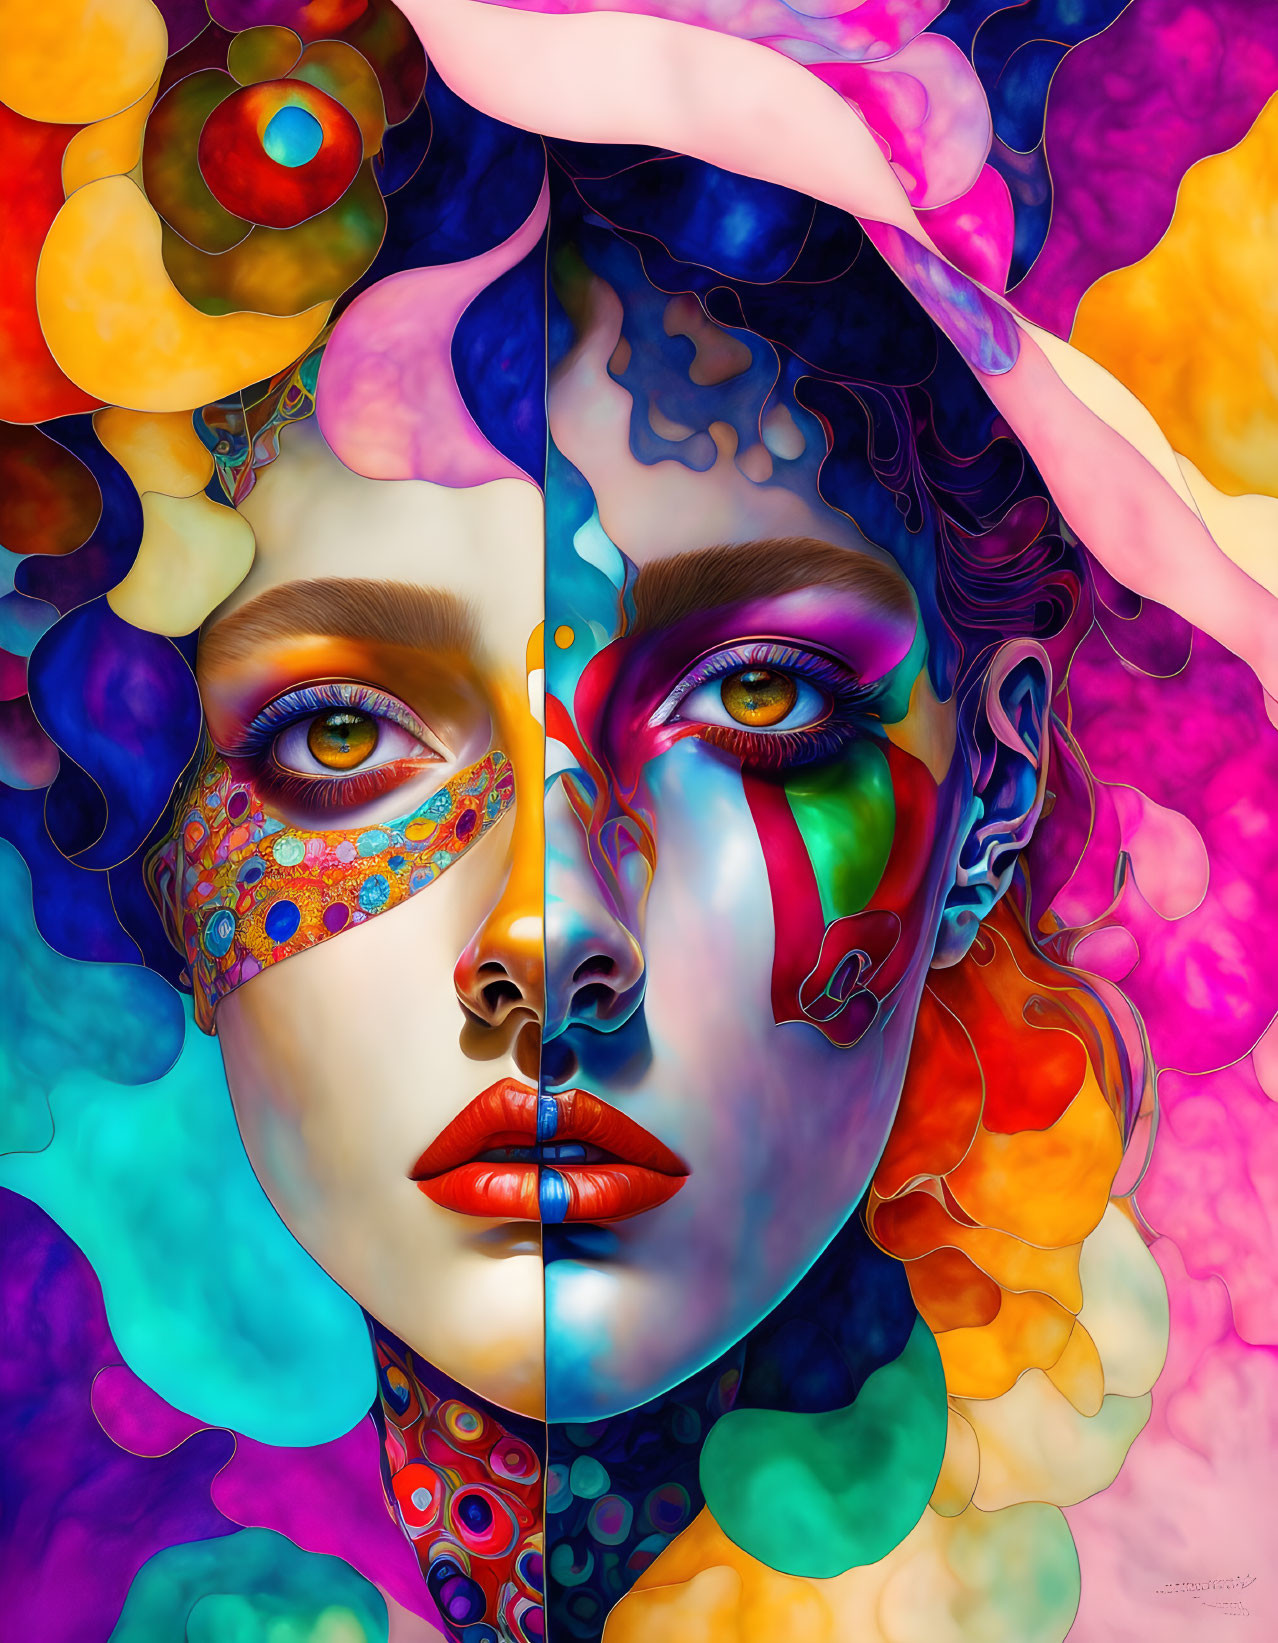 Digital artwork: Split design of realistic female face and abstract pattern